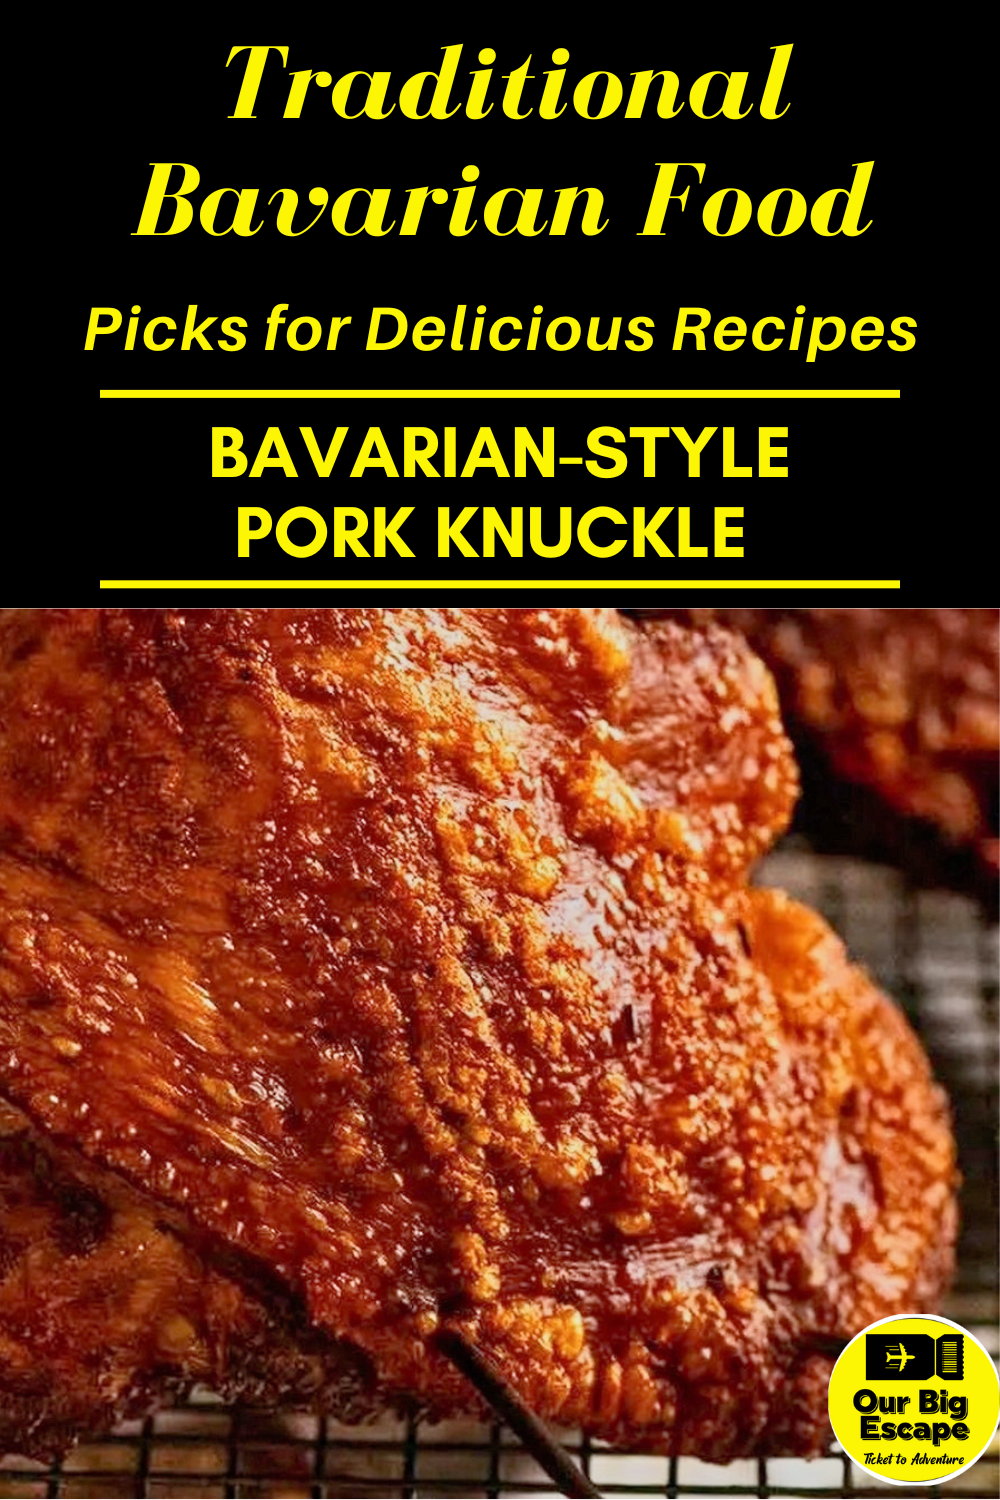 Bavarian-style Pork Knuckle - 18 Traditional Bavarian Food Picks for Delicious Recipes